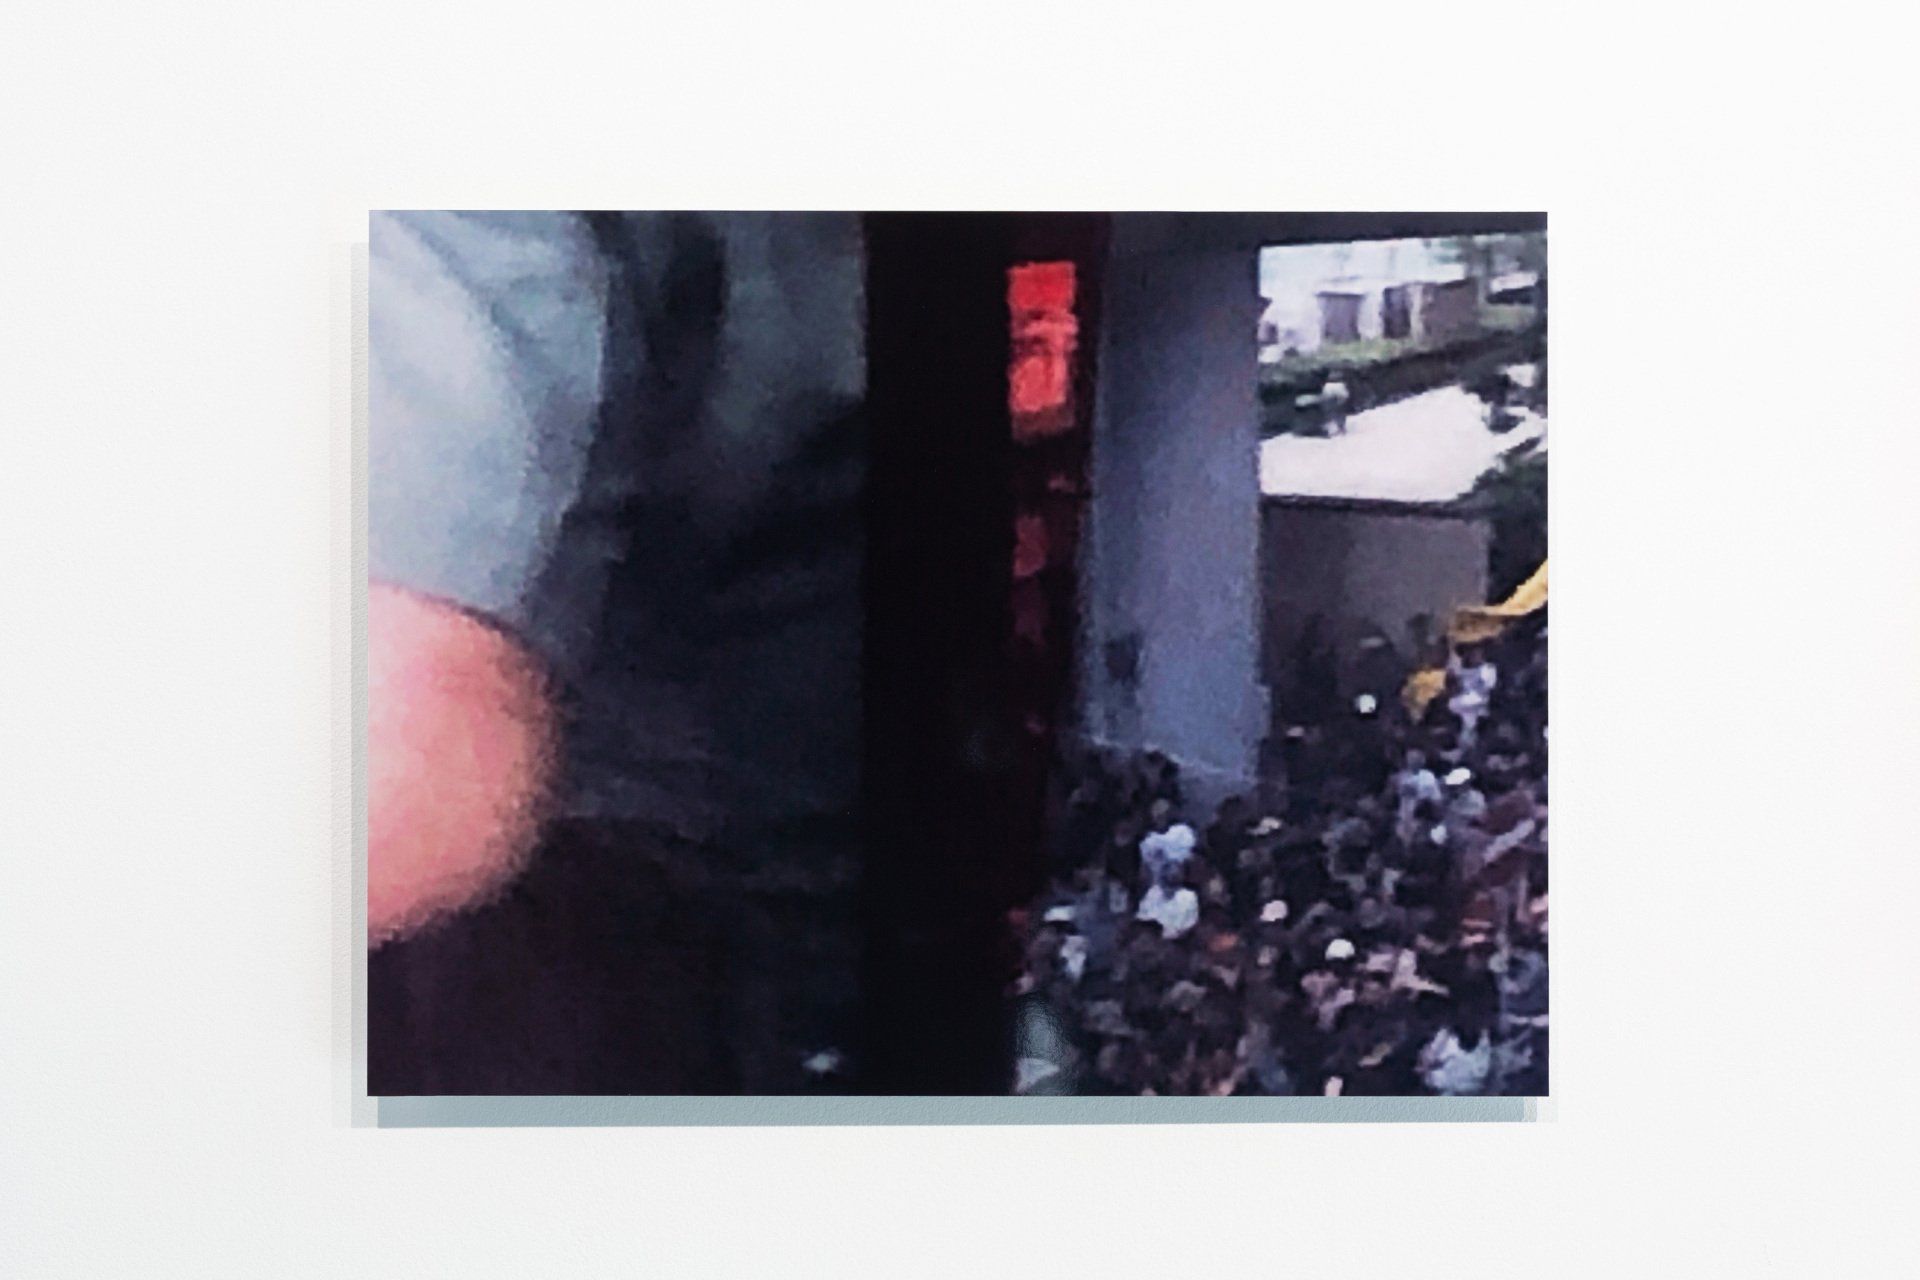 Article 23 protest I, Causeway Bay, 1/7/2003. Contact sheet, Kodak Portra 400VC negative film, 135mm. (2019) 45x60cm. Digital c-print on Fujicolor Crystal Archive Paper. Installation view. Photograph by Jessica Maurer.